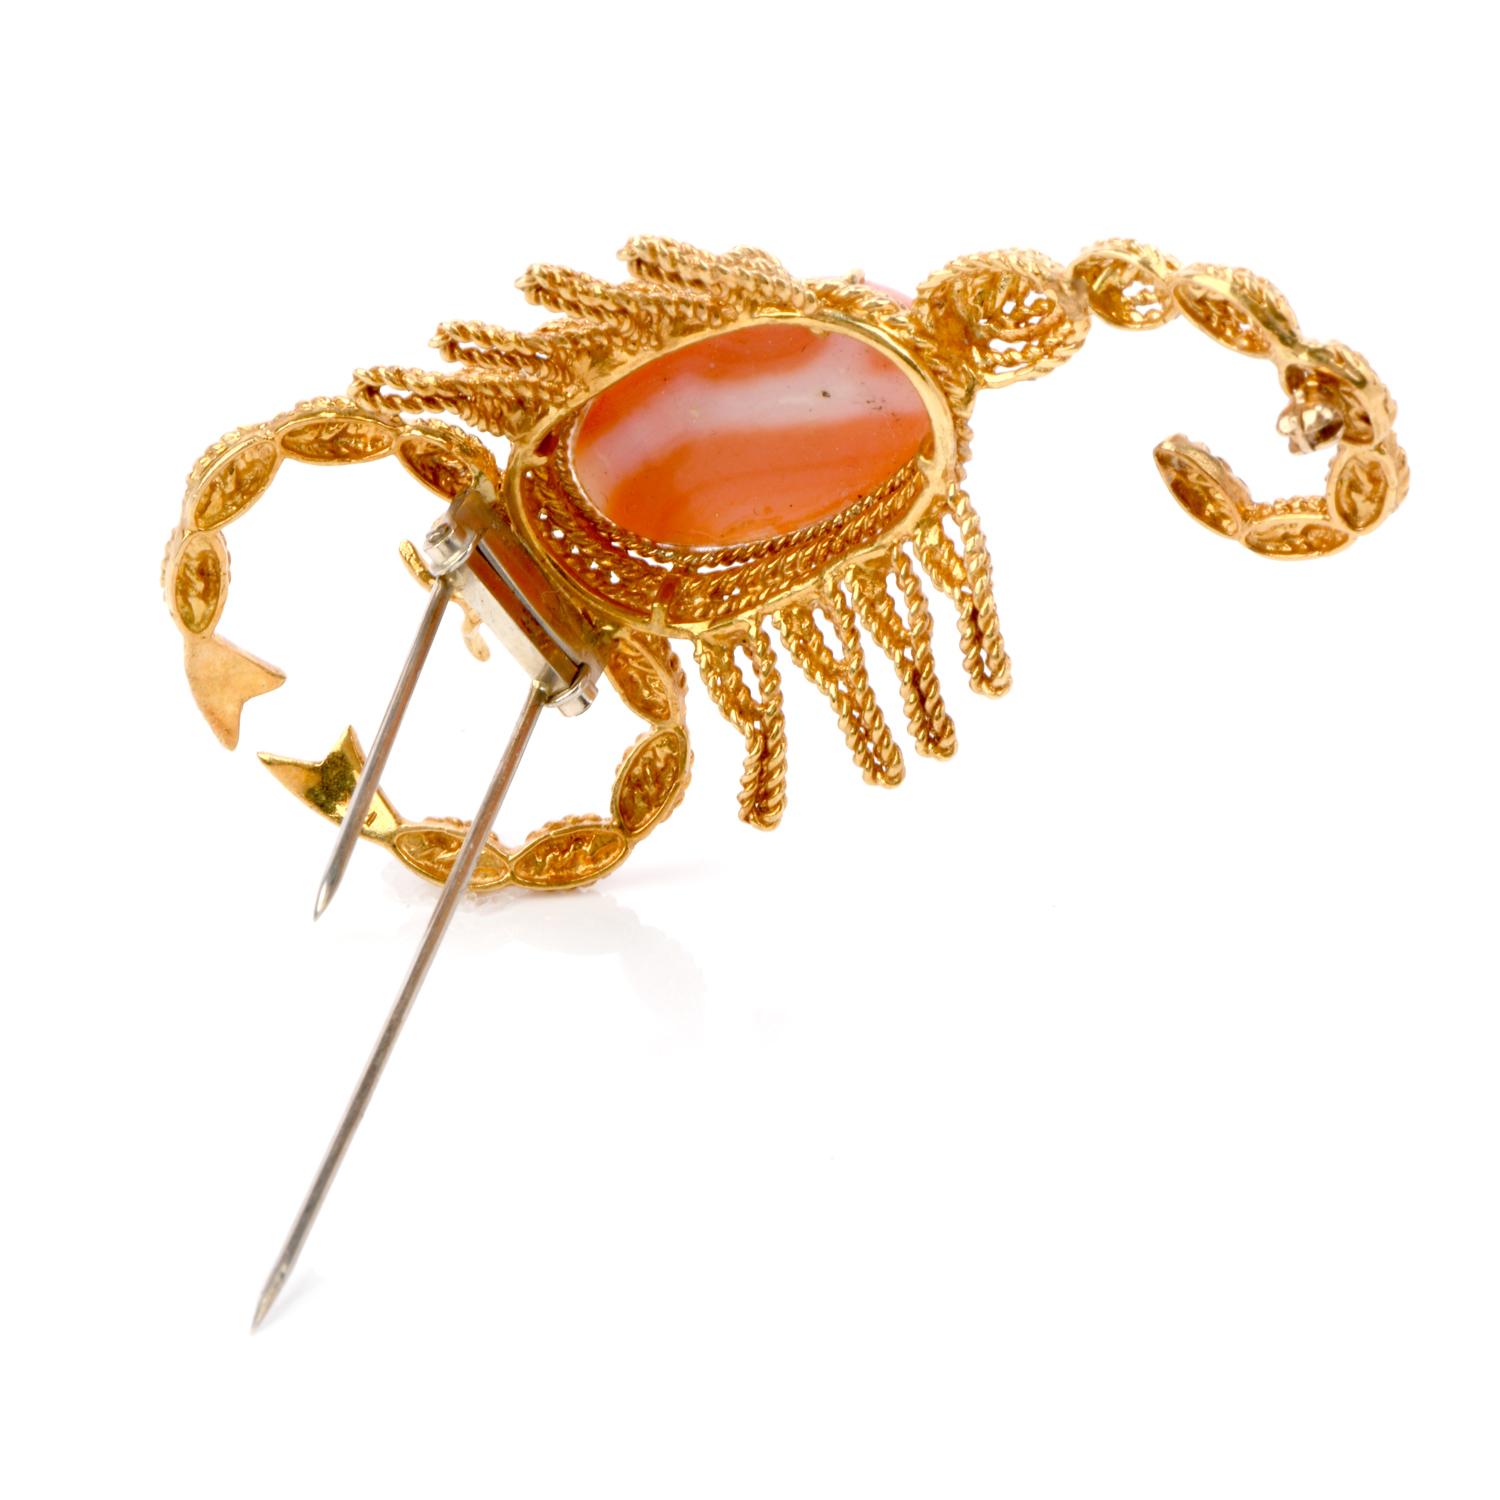 Scorpions symbolize ardency, rebirth and protection, so bring some passion and transformation in your life with this stunning Vintage Diamond 18K Gold Scorpion Oval Cabochon Pin Brooch! 

The body of the scorpion has 1 coral, oval shaped cabochon,